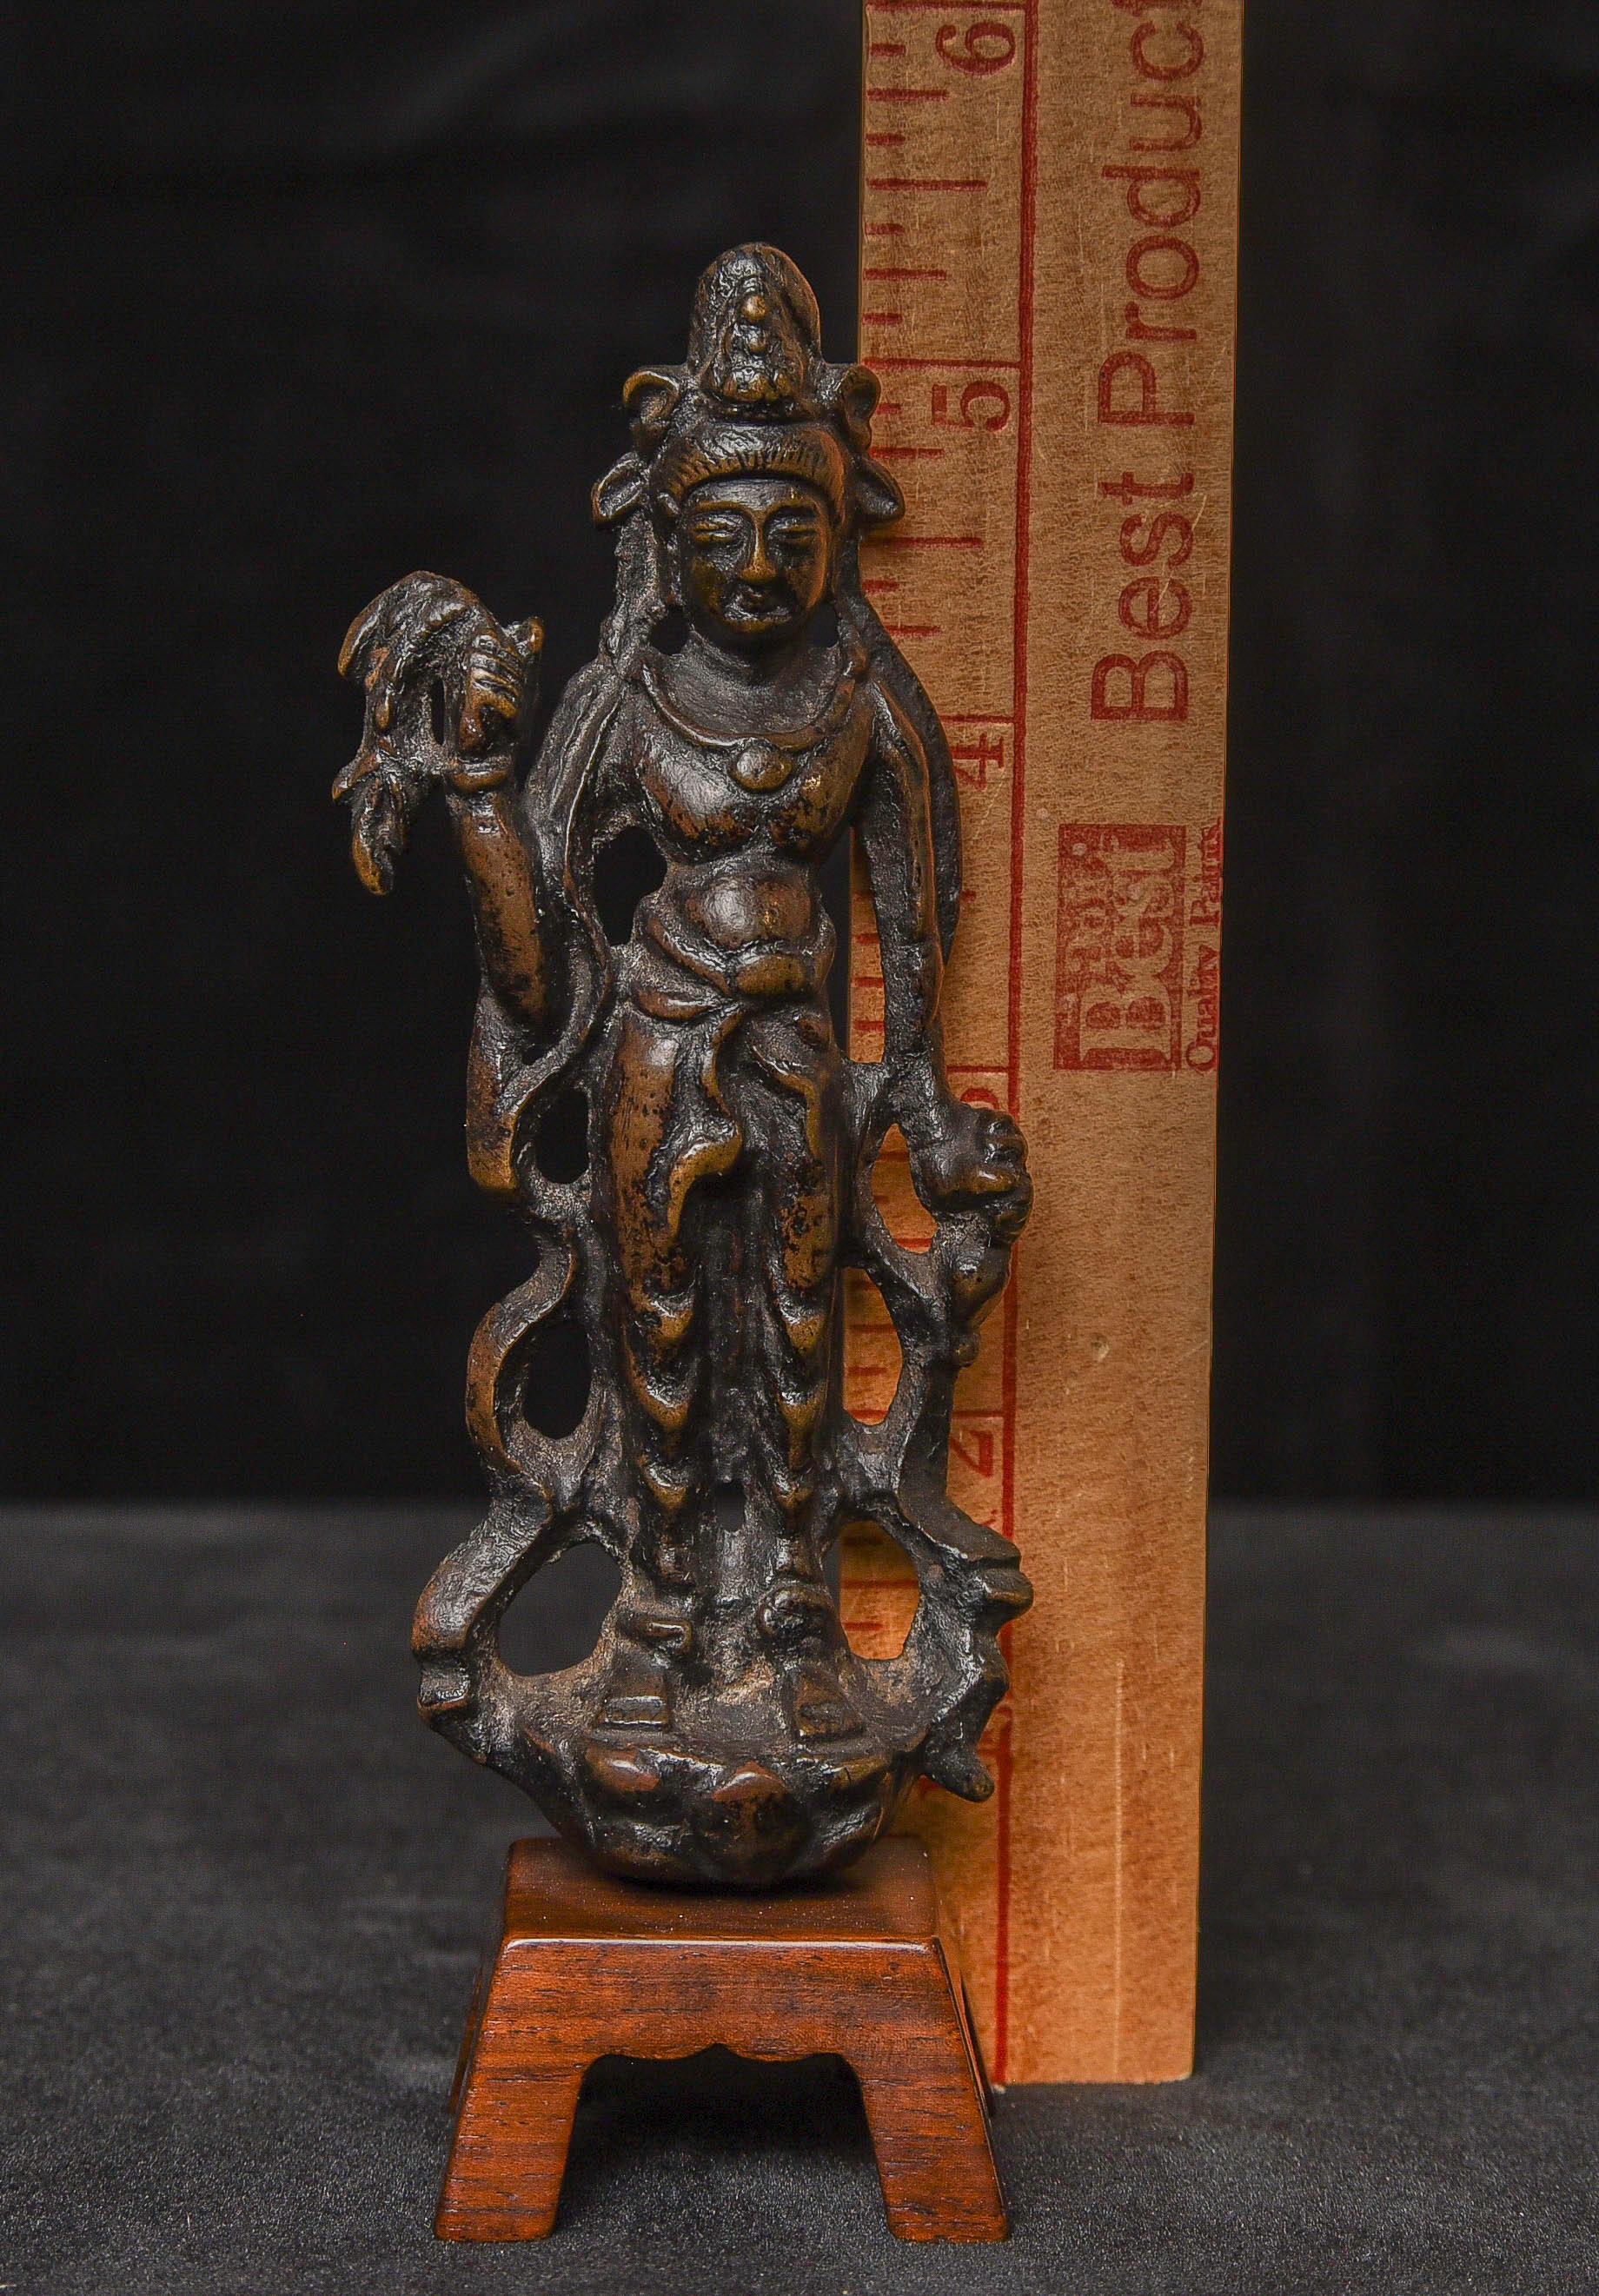  6-9th C Chinese Bronze Bodhisattva of Compassion from the Tang Dynasty - 9685 In Good Condition For Sale In Ukiah, CA